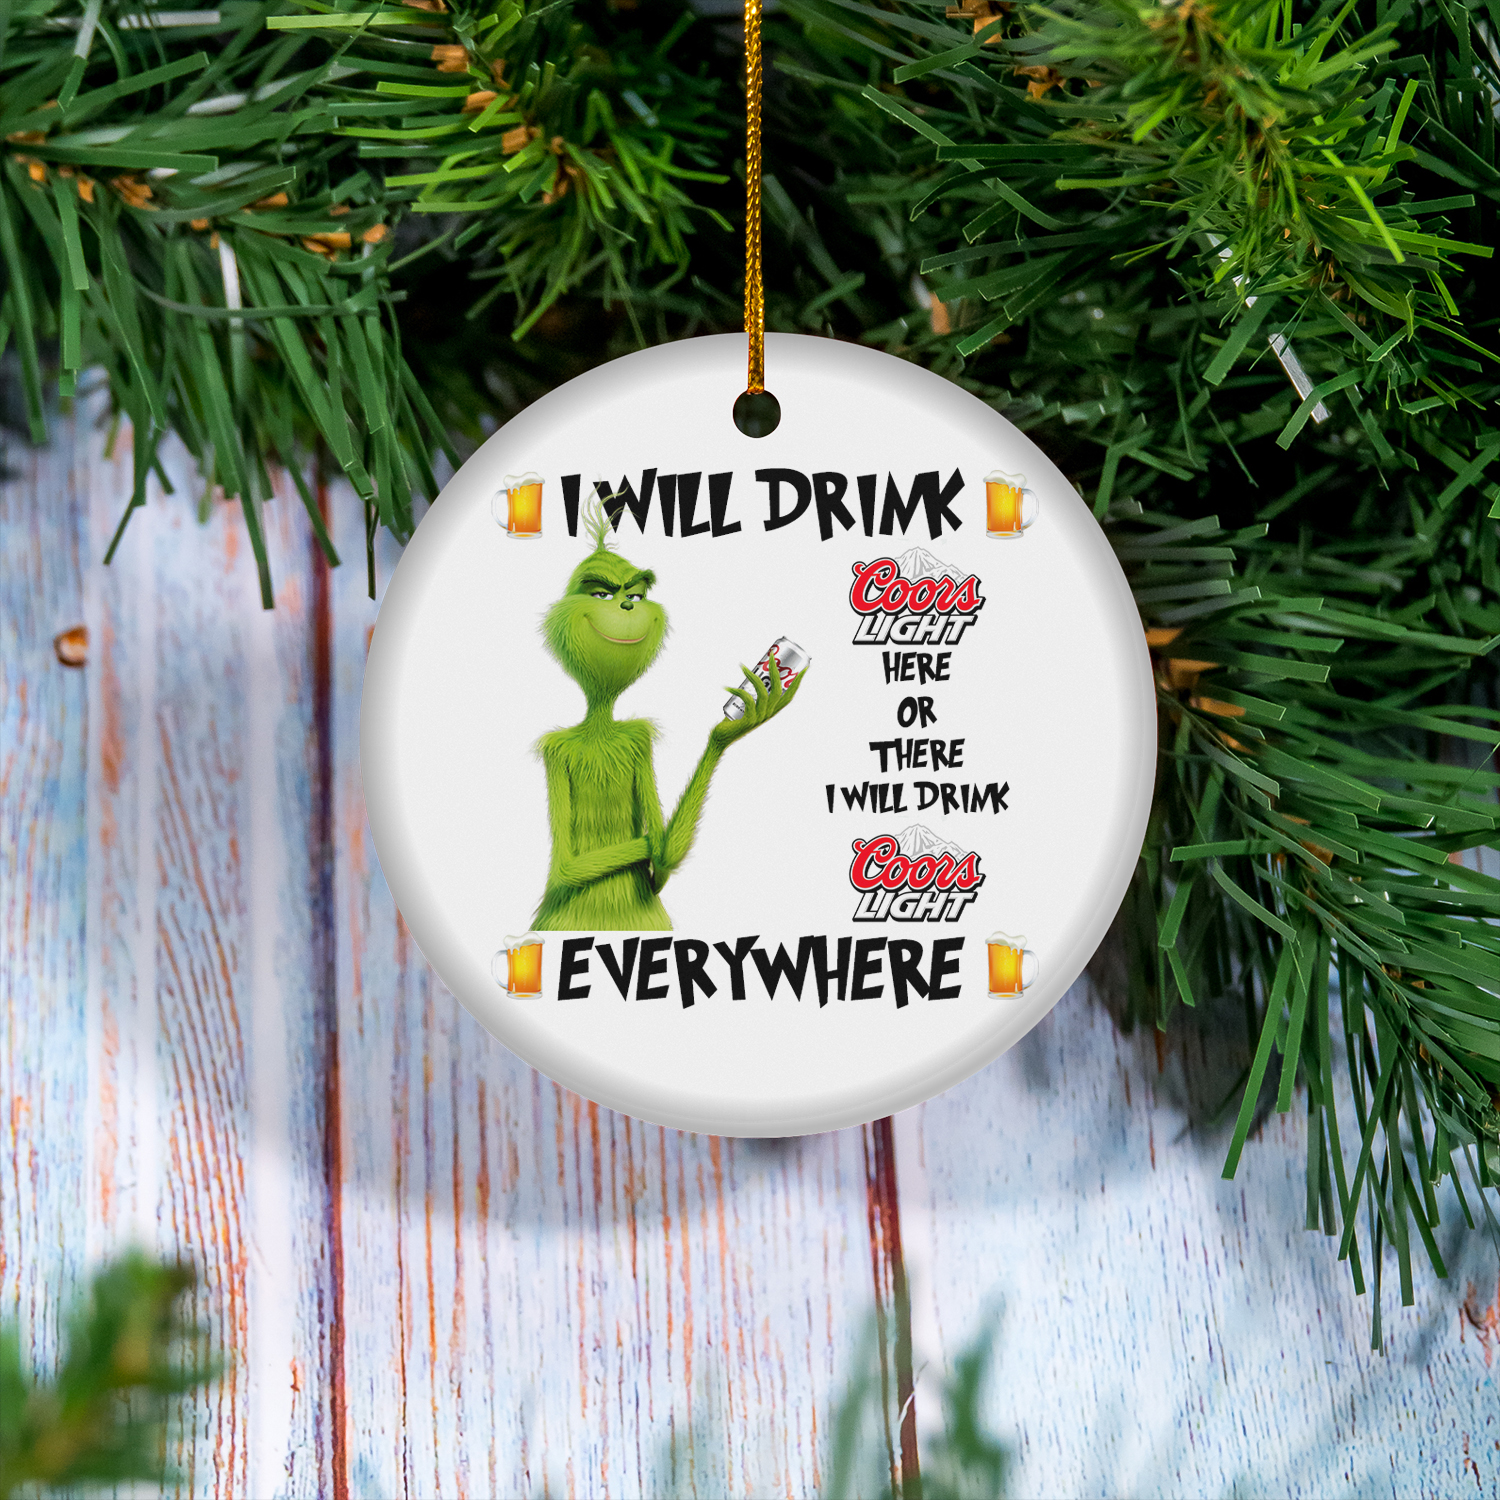 https://newagetee.com/wp-content/uploads/2020/11/Grinch-I-Will-Drink-Coors-Light-Here-And-There-Everywhere-Christmas-Ornament.jpg